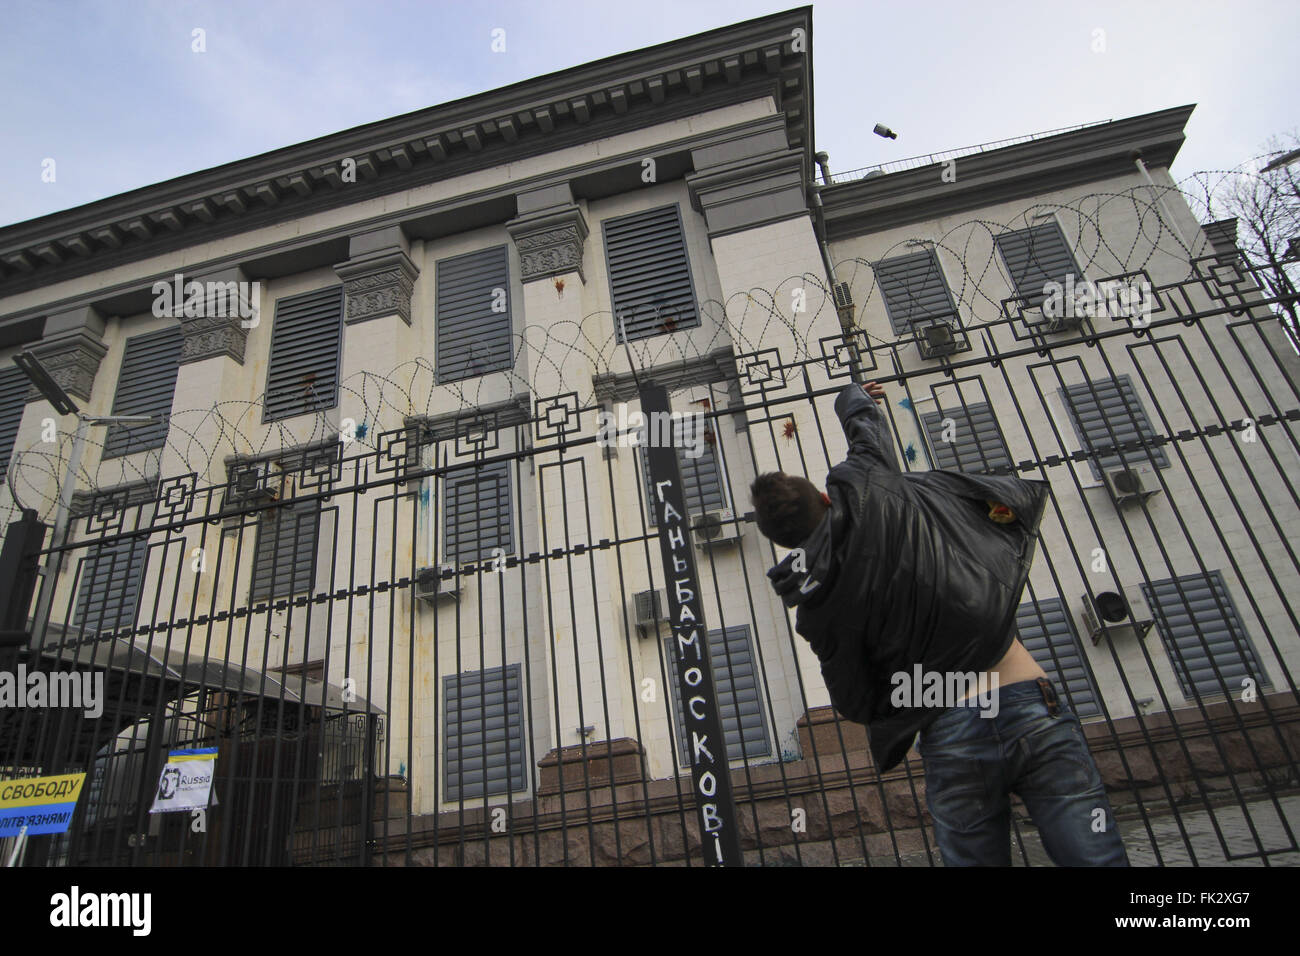 March 6, 2016 - Kiev, Ukraine - Protesters near the Russian embassy during a protest in Kiev, Ukraine, 06 March 2016. Protesters demanded Russia free former Ukrainian military pilot Nadia Savchenko. Savchenko announced on 03 March that she would go on a hunger strike while on trial in Russia for murder, Ukrainian state news agency Ukrinform reported. She faces up to 25 years in prison for allegedly helping kill two Russian state journalists in eastern Ukraine. (Credit Image: © Nazar Furyk via ZUMA Wire) Stock Photo